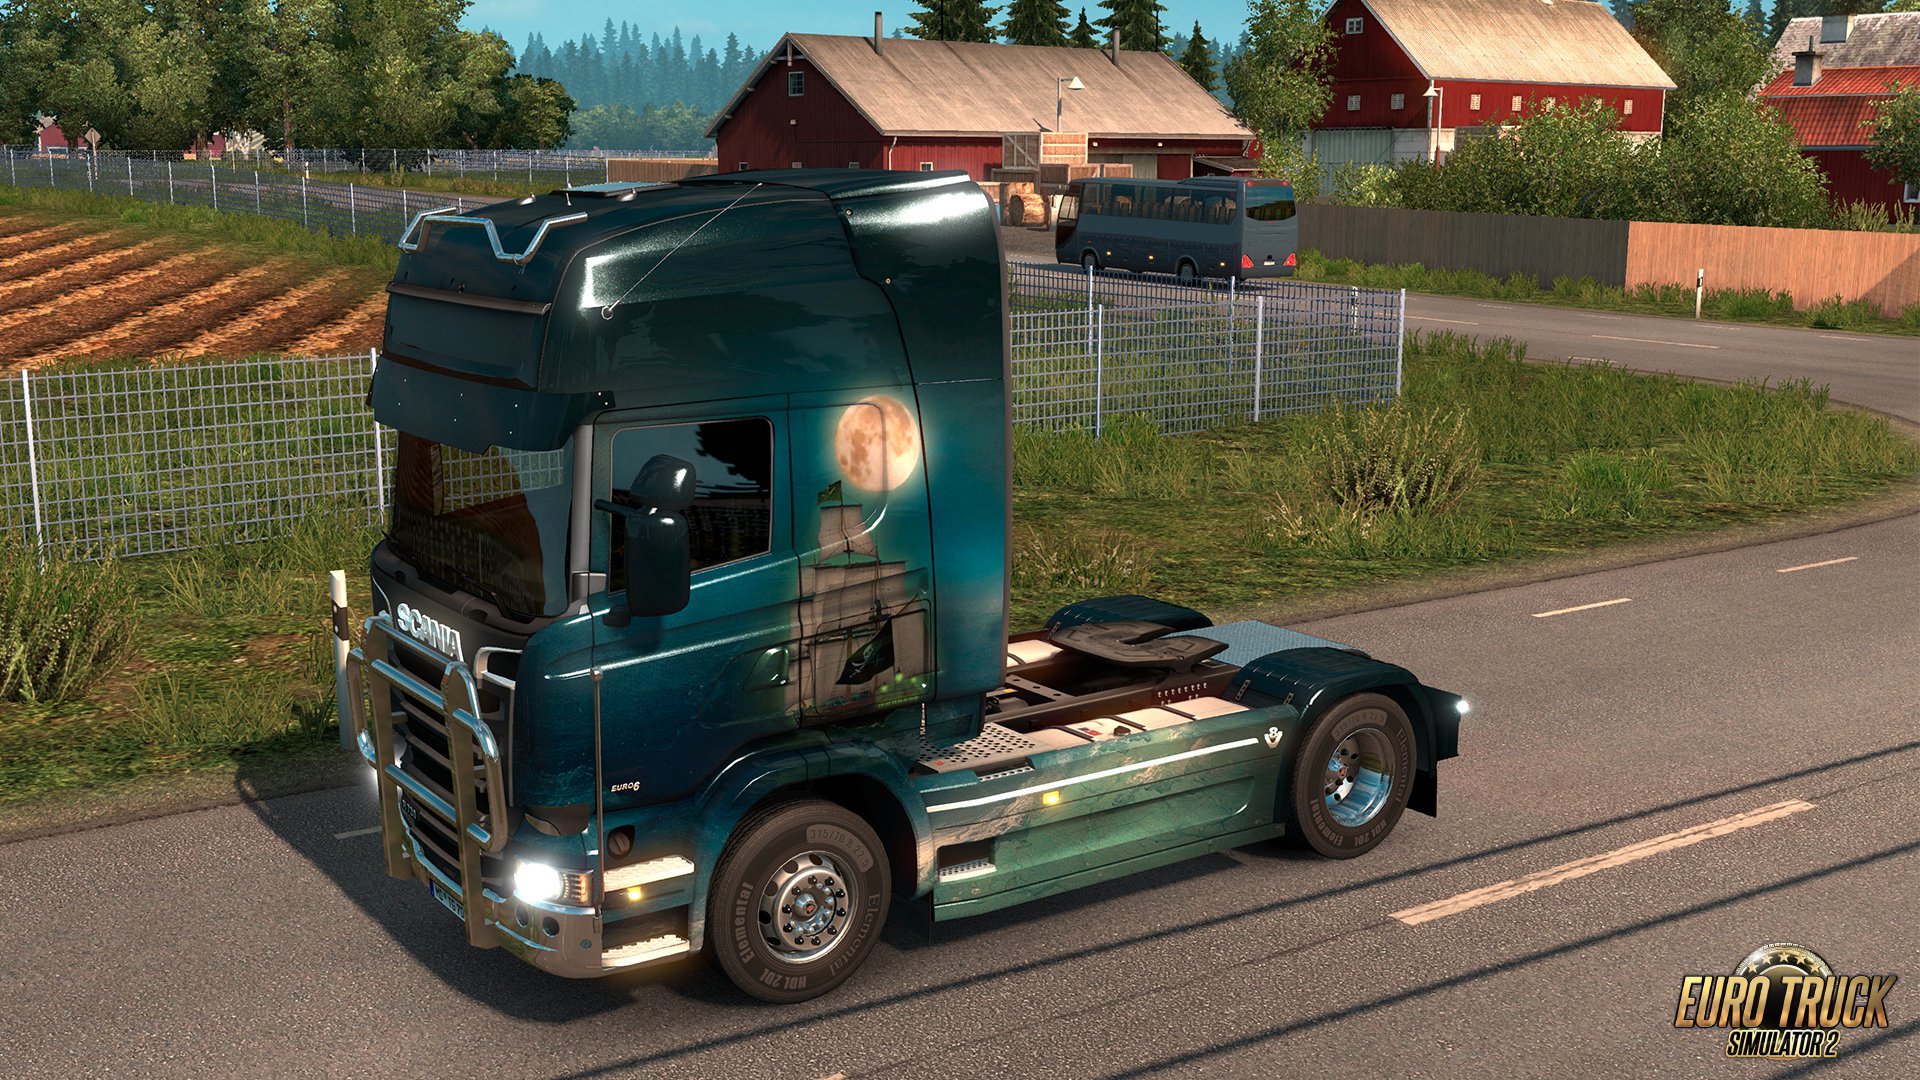 Euro Truck Simulátor 2 Pirate Paint Jobs Pack 10